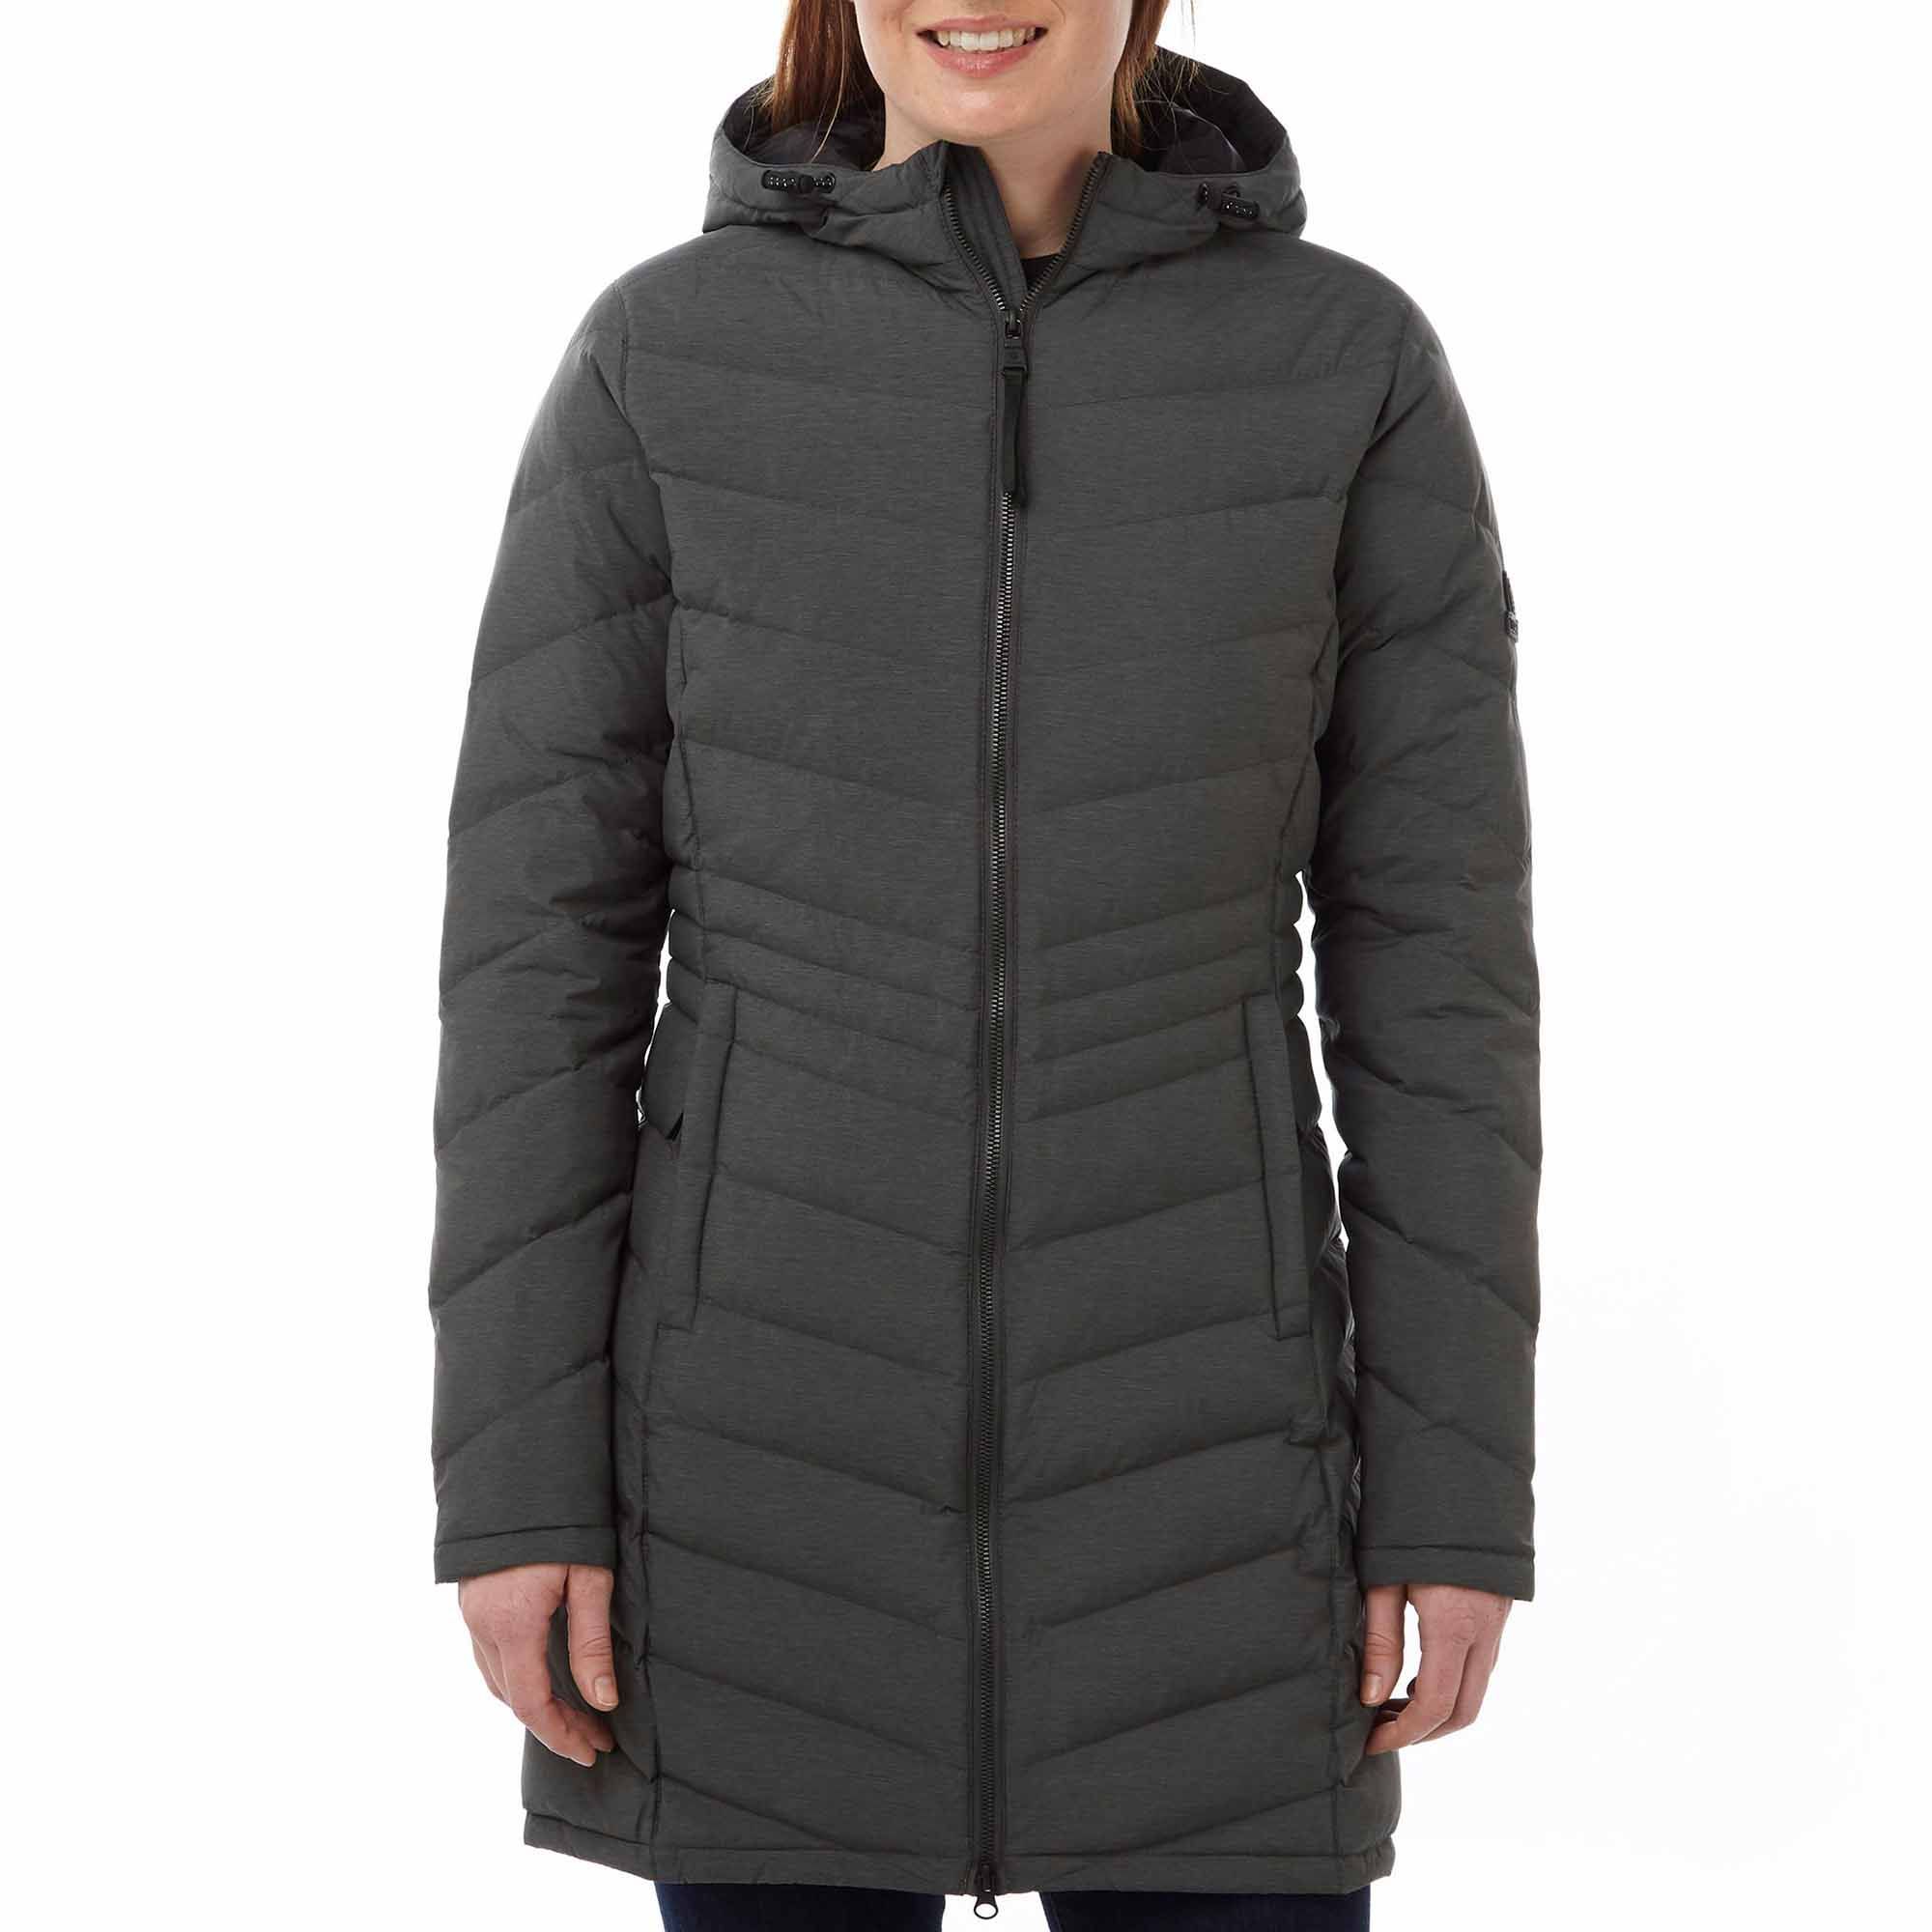 This longer-length down-filled hooded jacket is a smart choice in colder conditions. The surprisingly sleek profile conceals highly effective natural down insulation that’s corralled into neat diagonal baffles for a flattering fit. Lightweight, showerproof and breathable, it’s a winter outdoor essential.